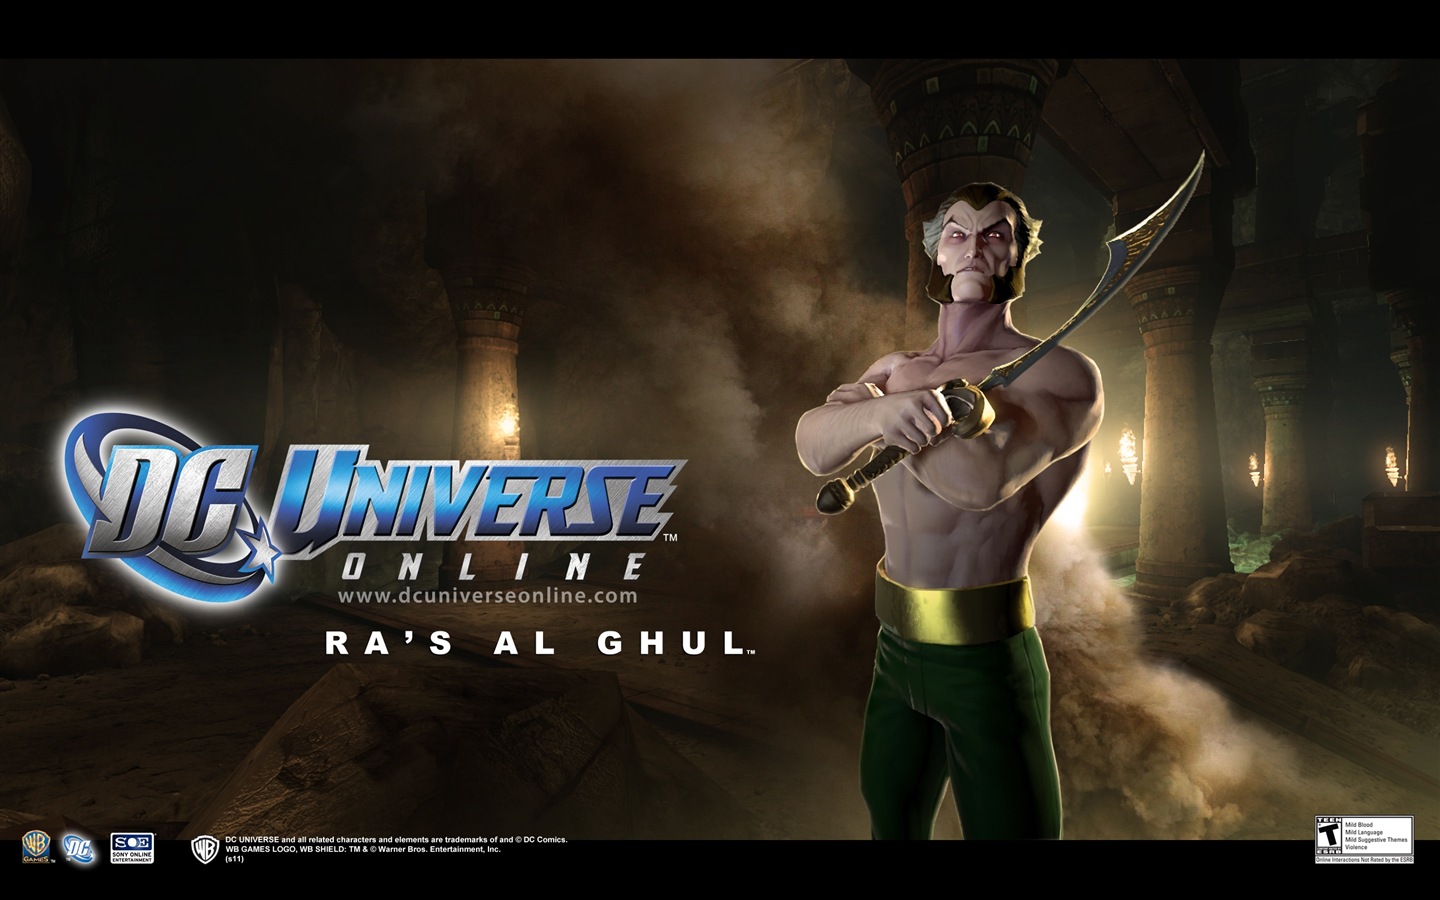 DC Universe Online HD game wallpapers #8 - 1440x900